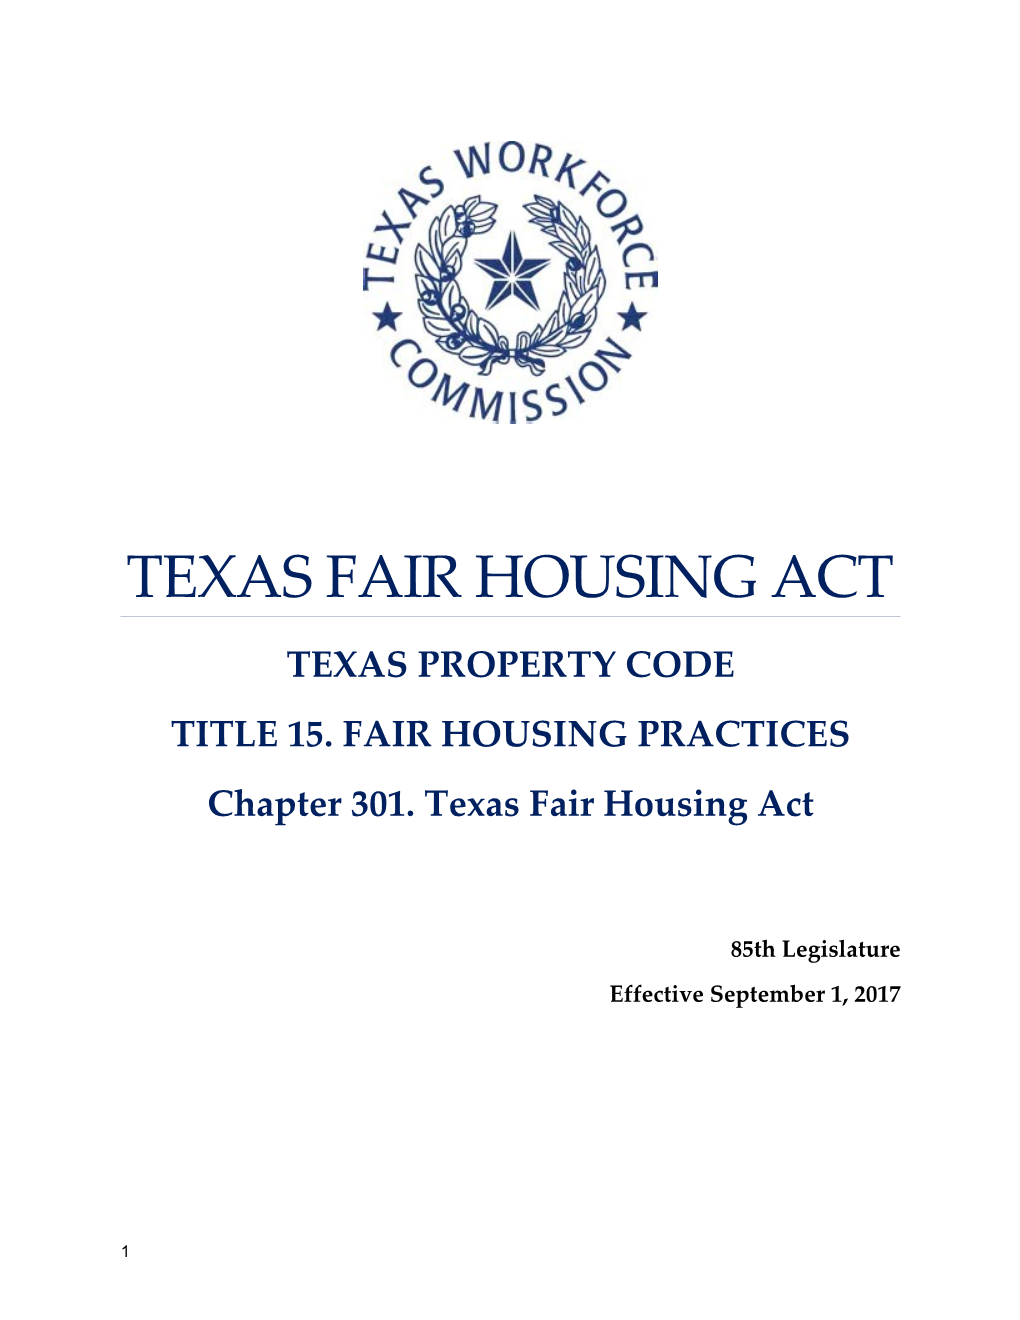 Chapter 301, Property Code - Fair Housing Act